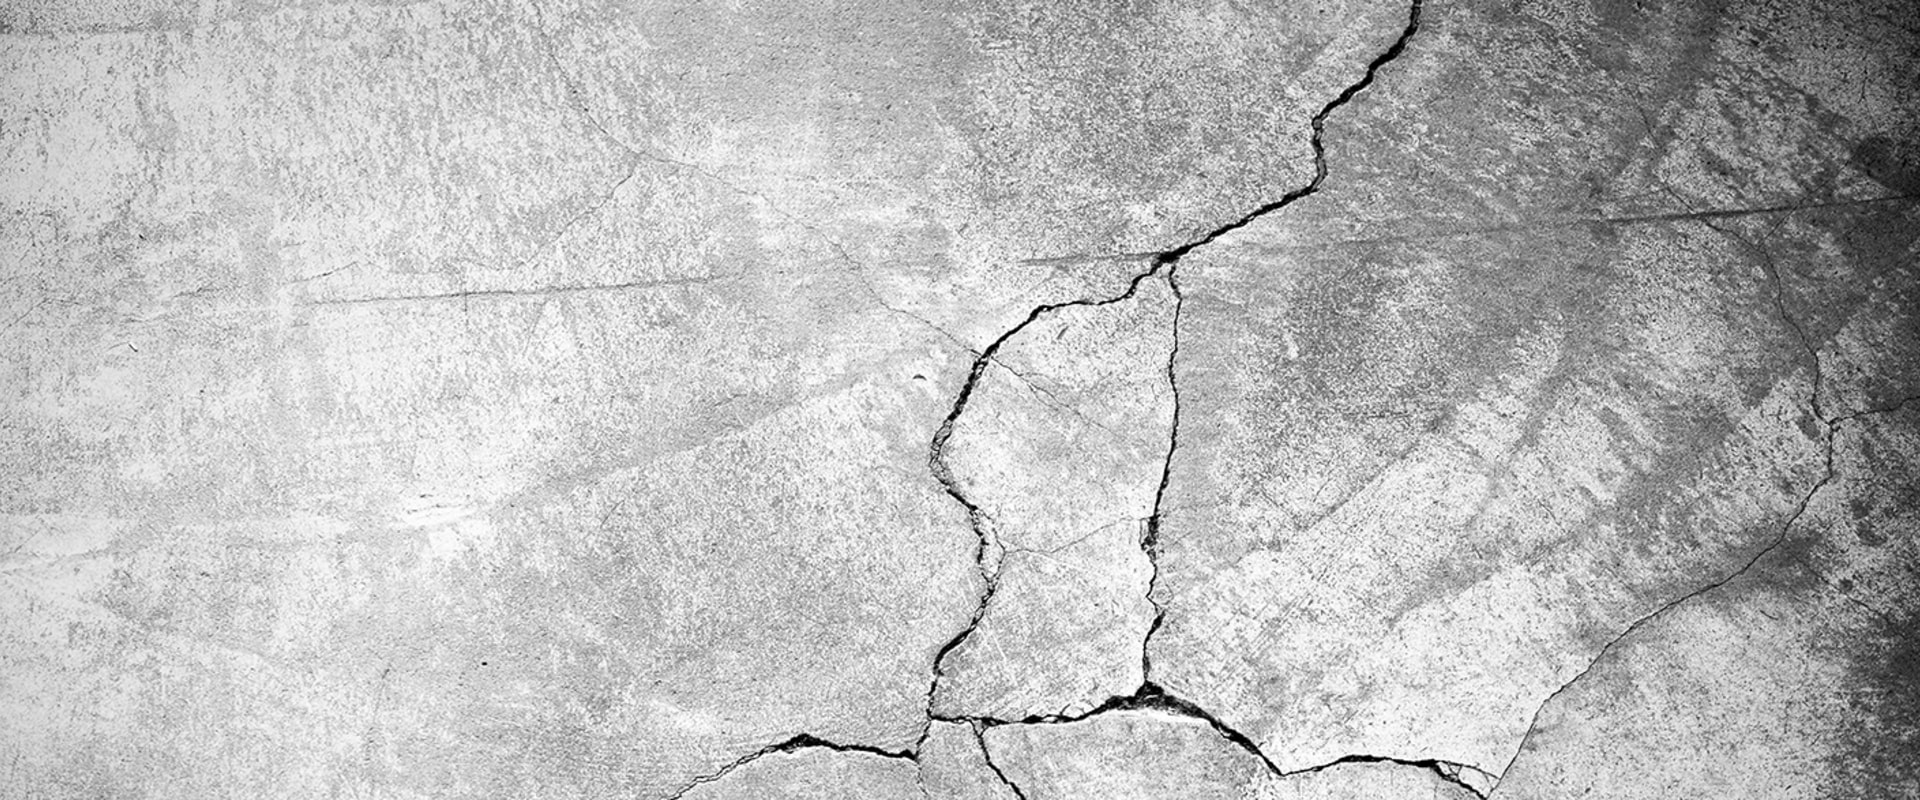 The Cracking Effect of Concrete: Causes, Prevention and Repair